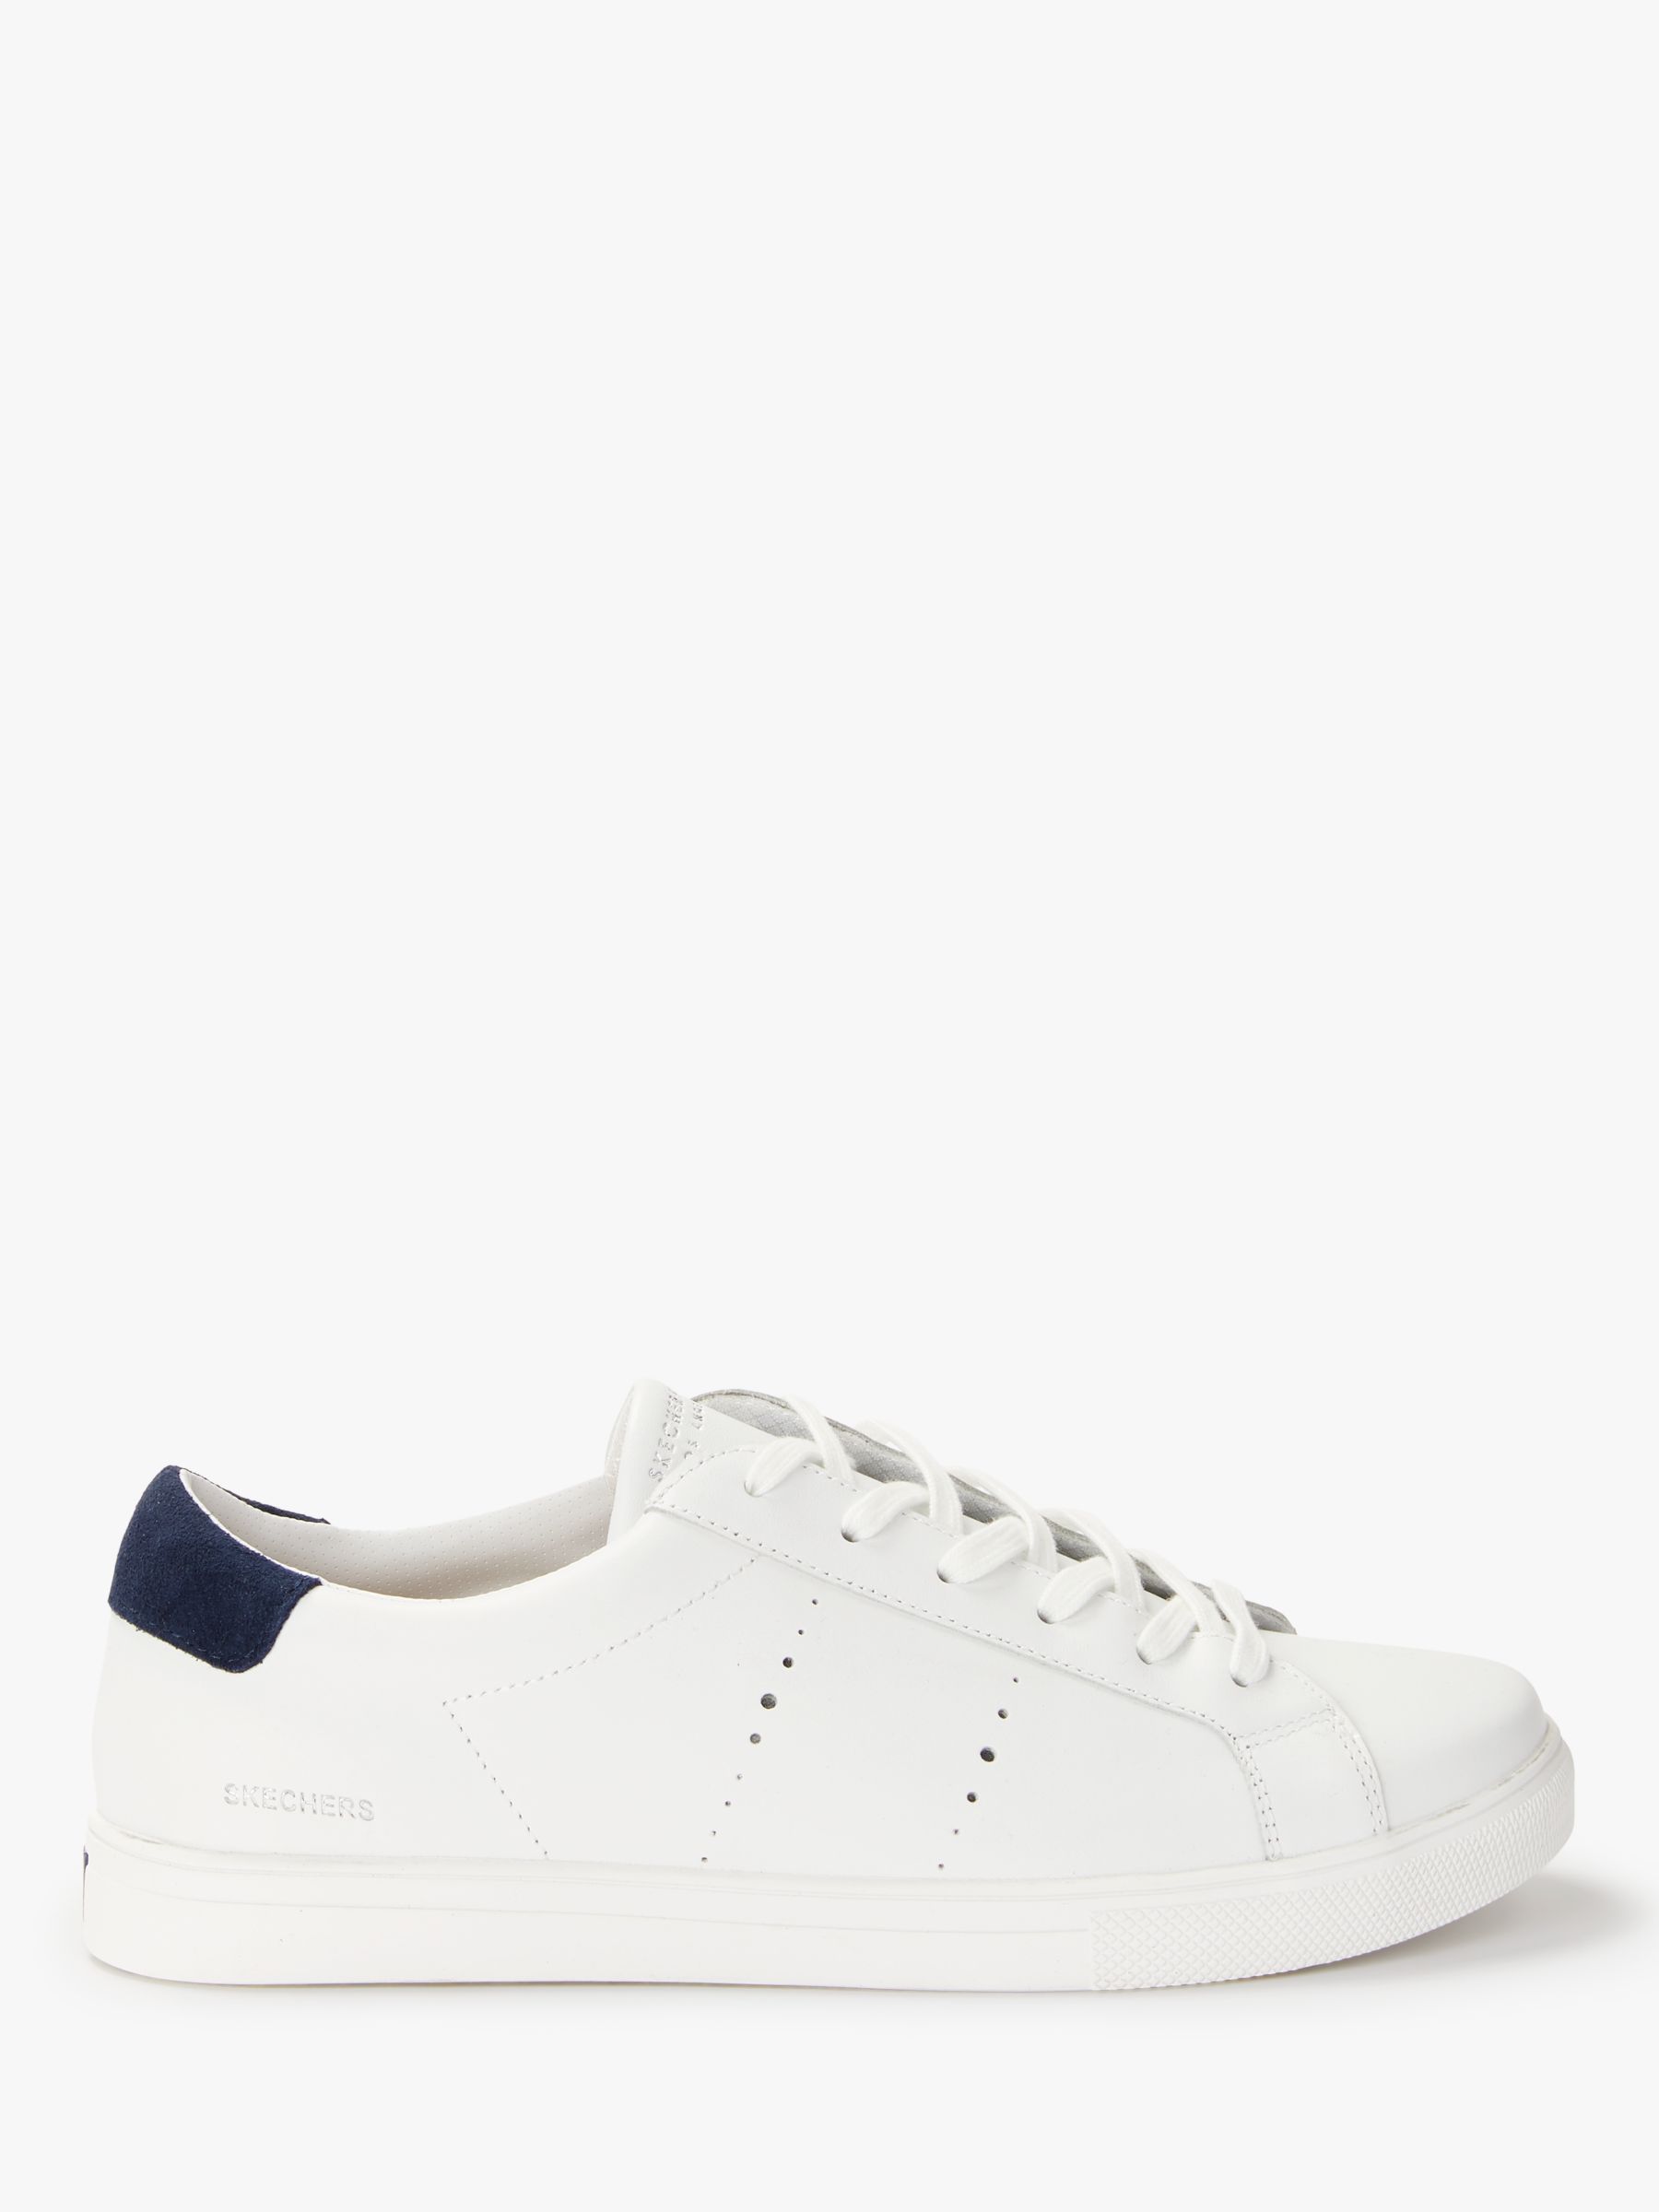 skechers white leather trainers